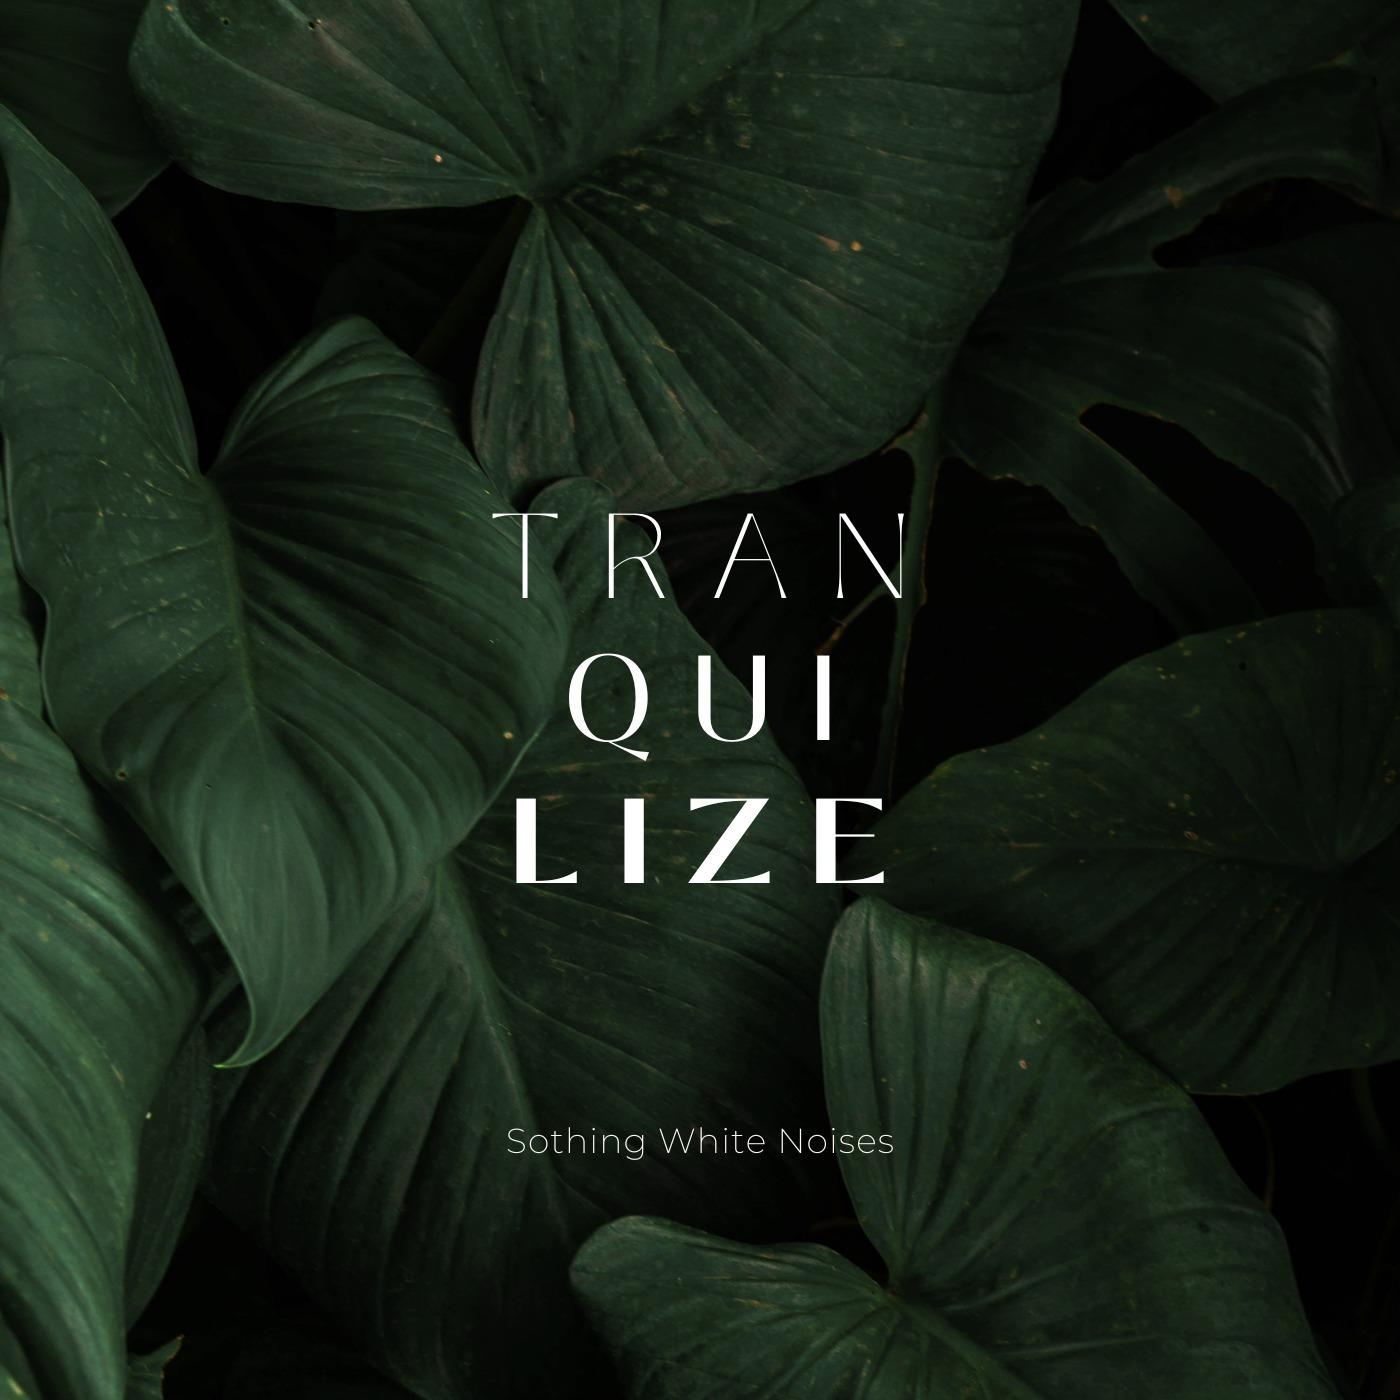 Traquilize - Sothing White Noises